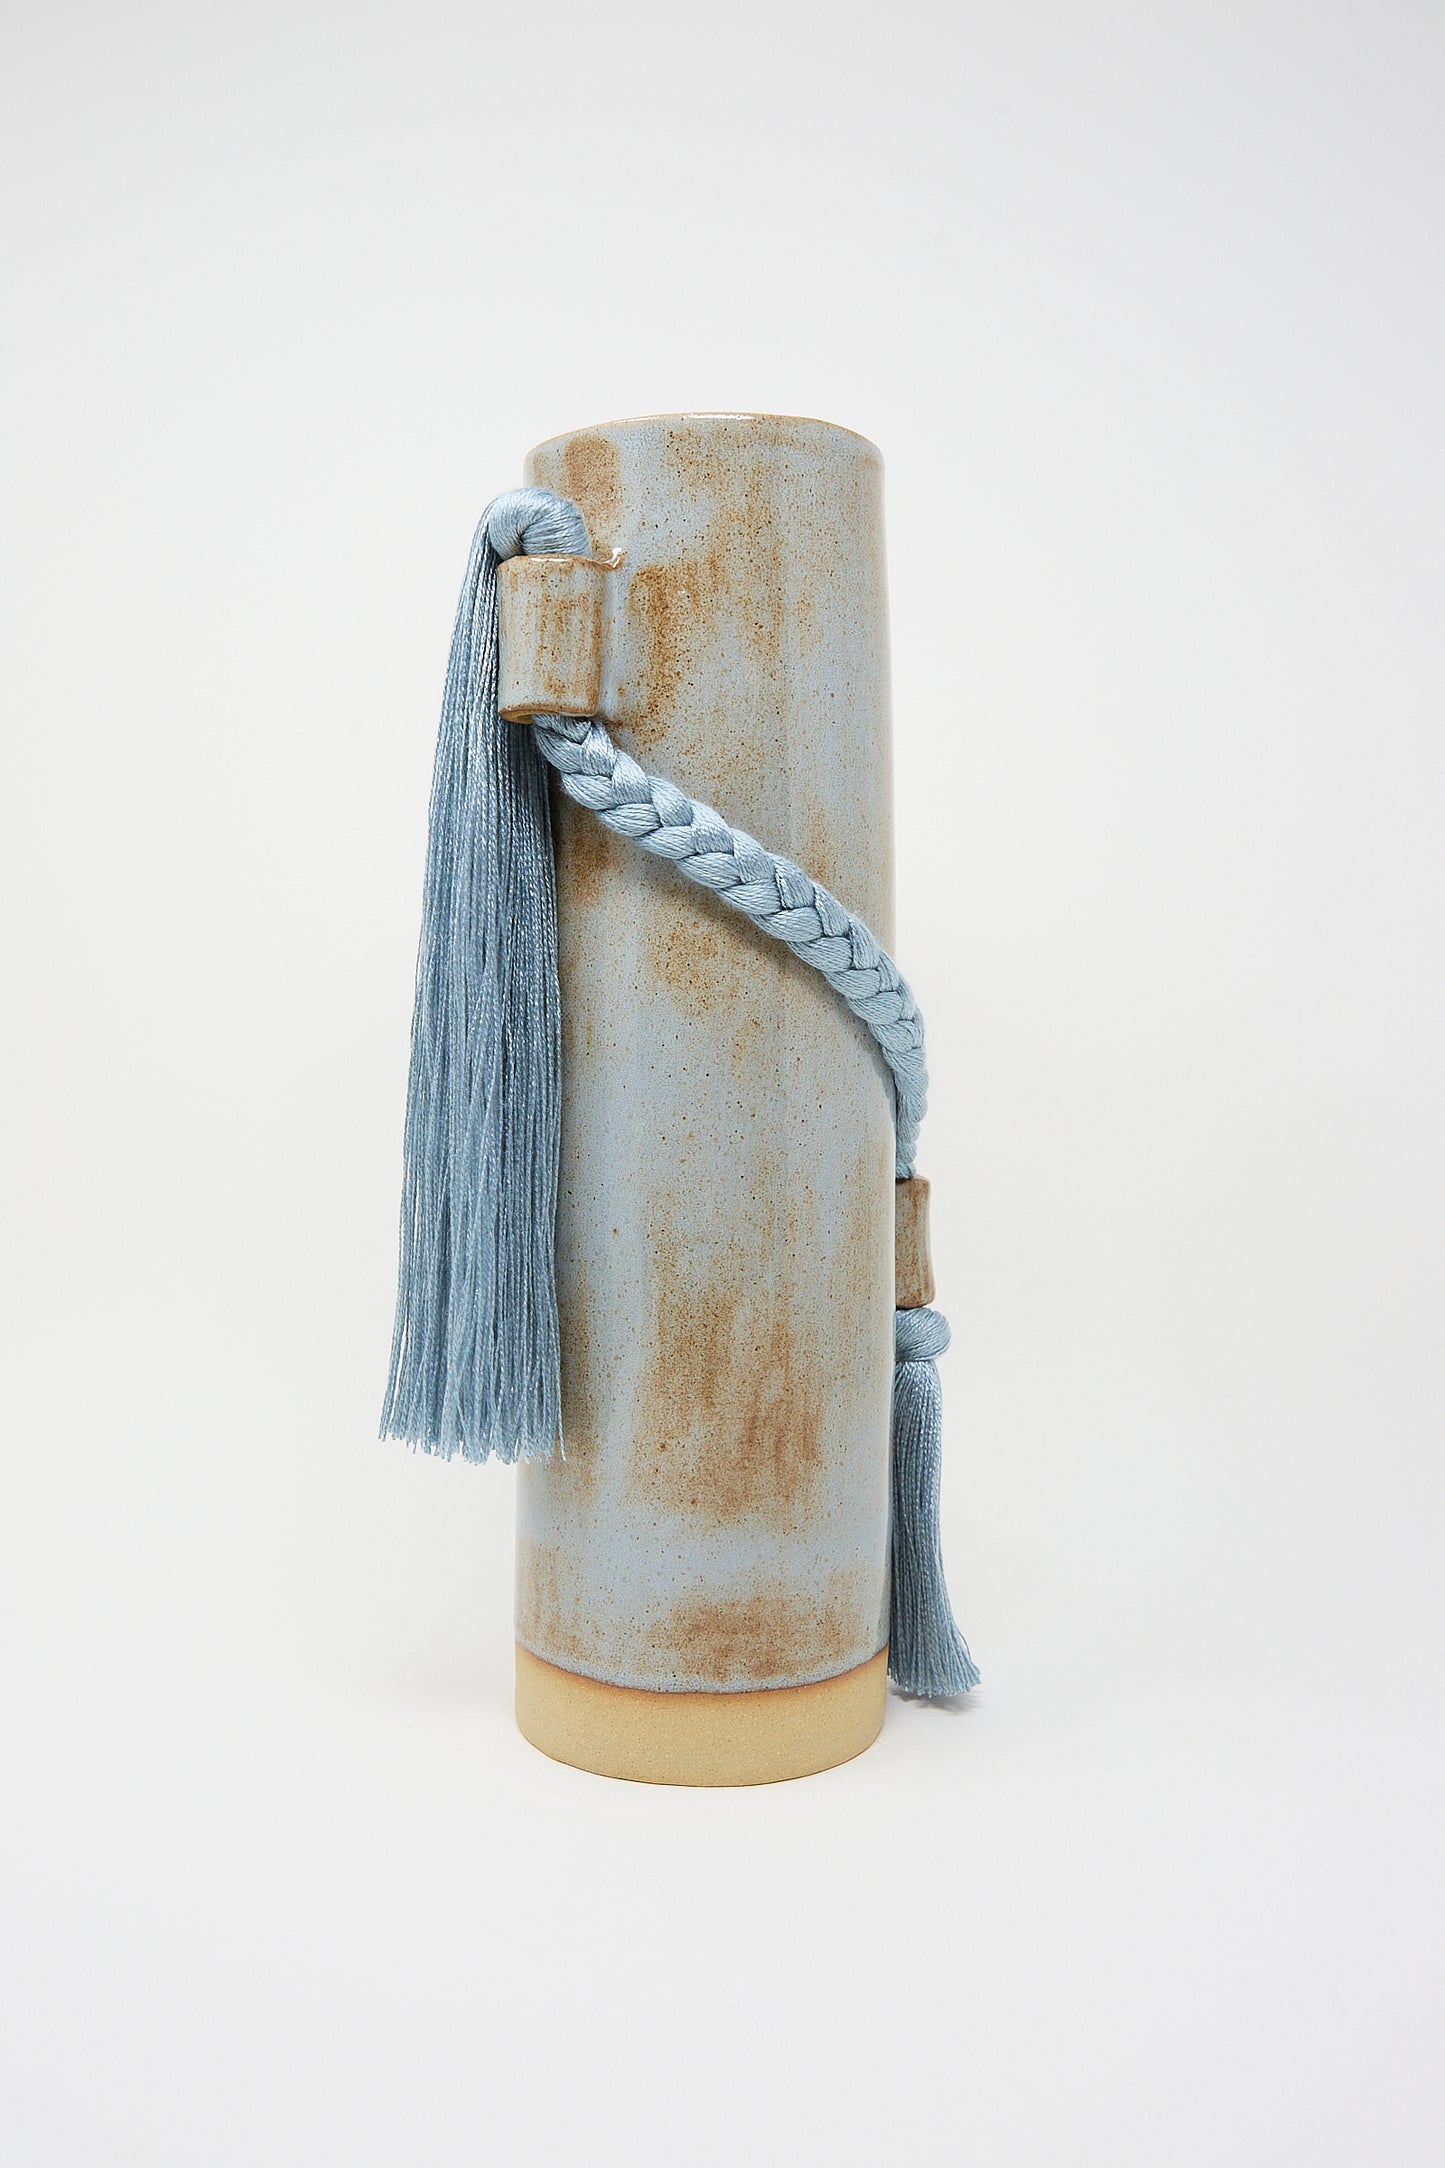 A Karen Tinney stoneware Vase #695 in Blue with a tassel attached to its side on a white background.